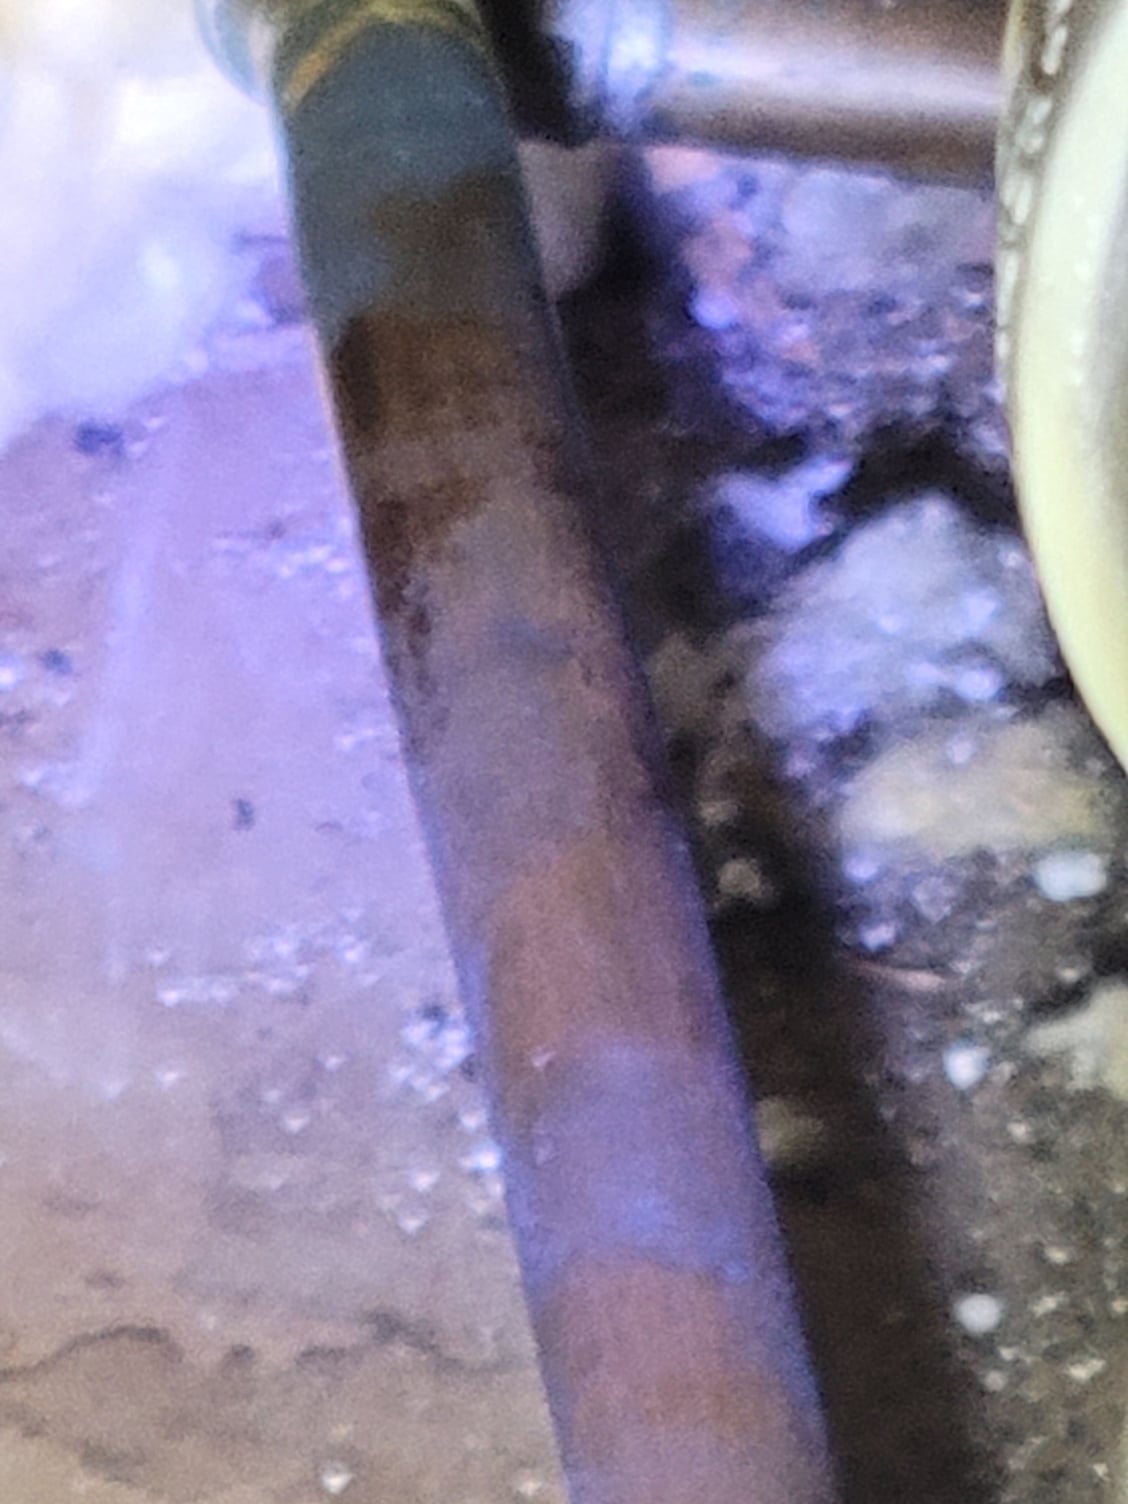 35 year old copper pipe in contact with steel mc cable - DoItYourself ...